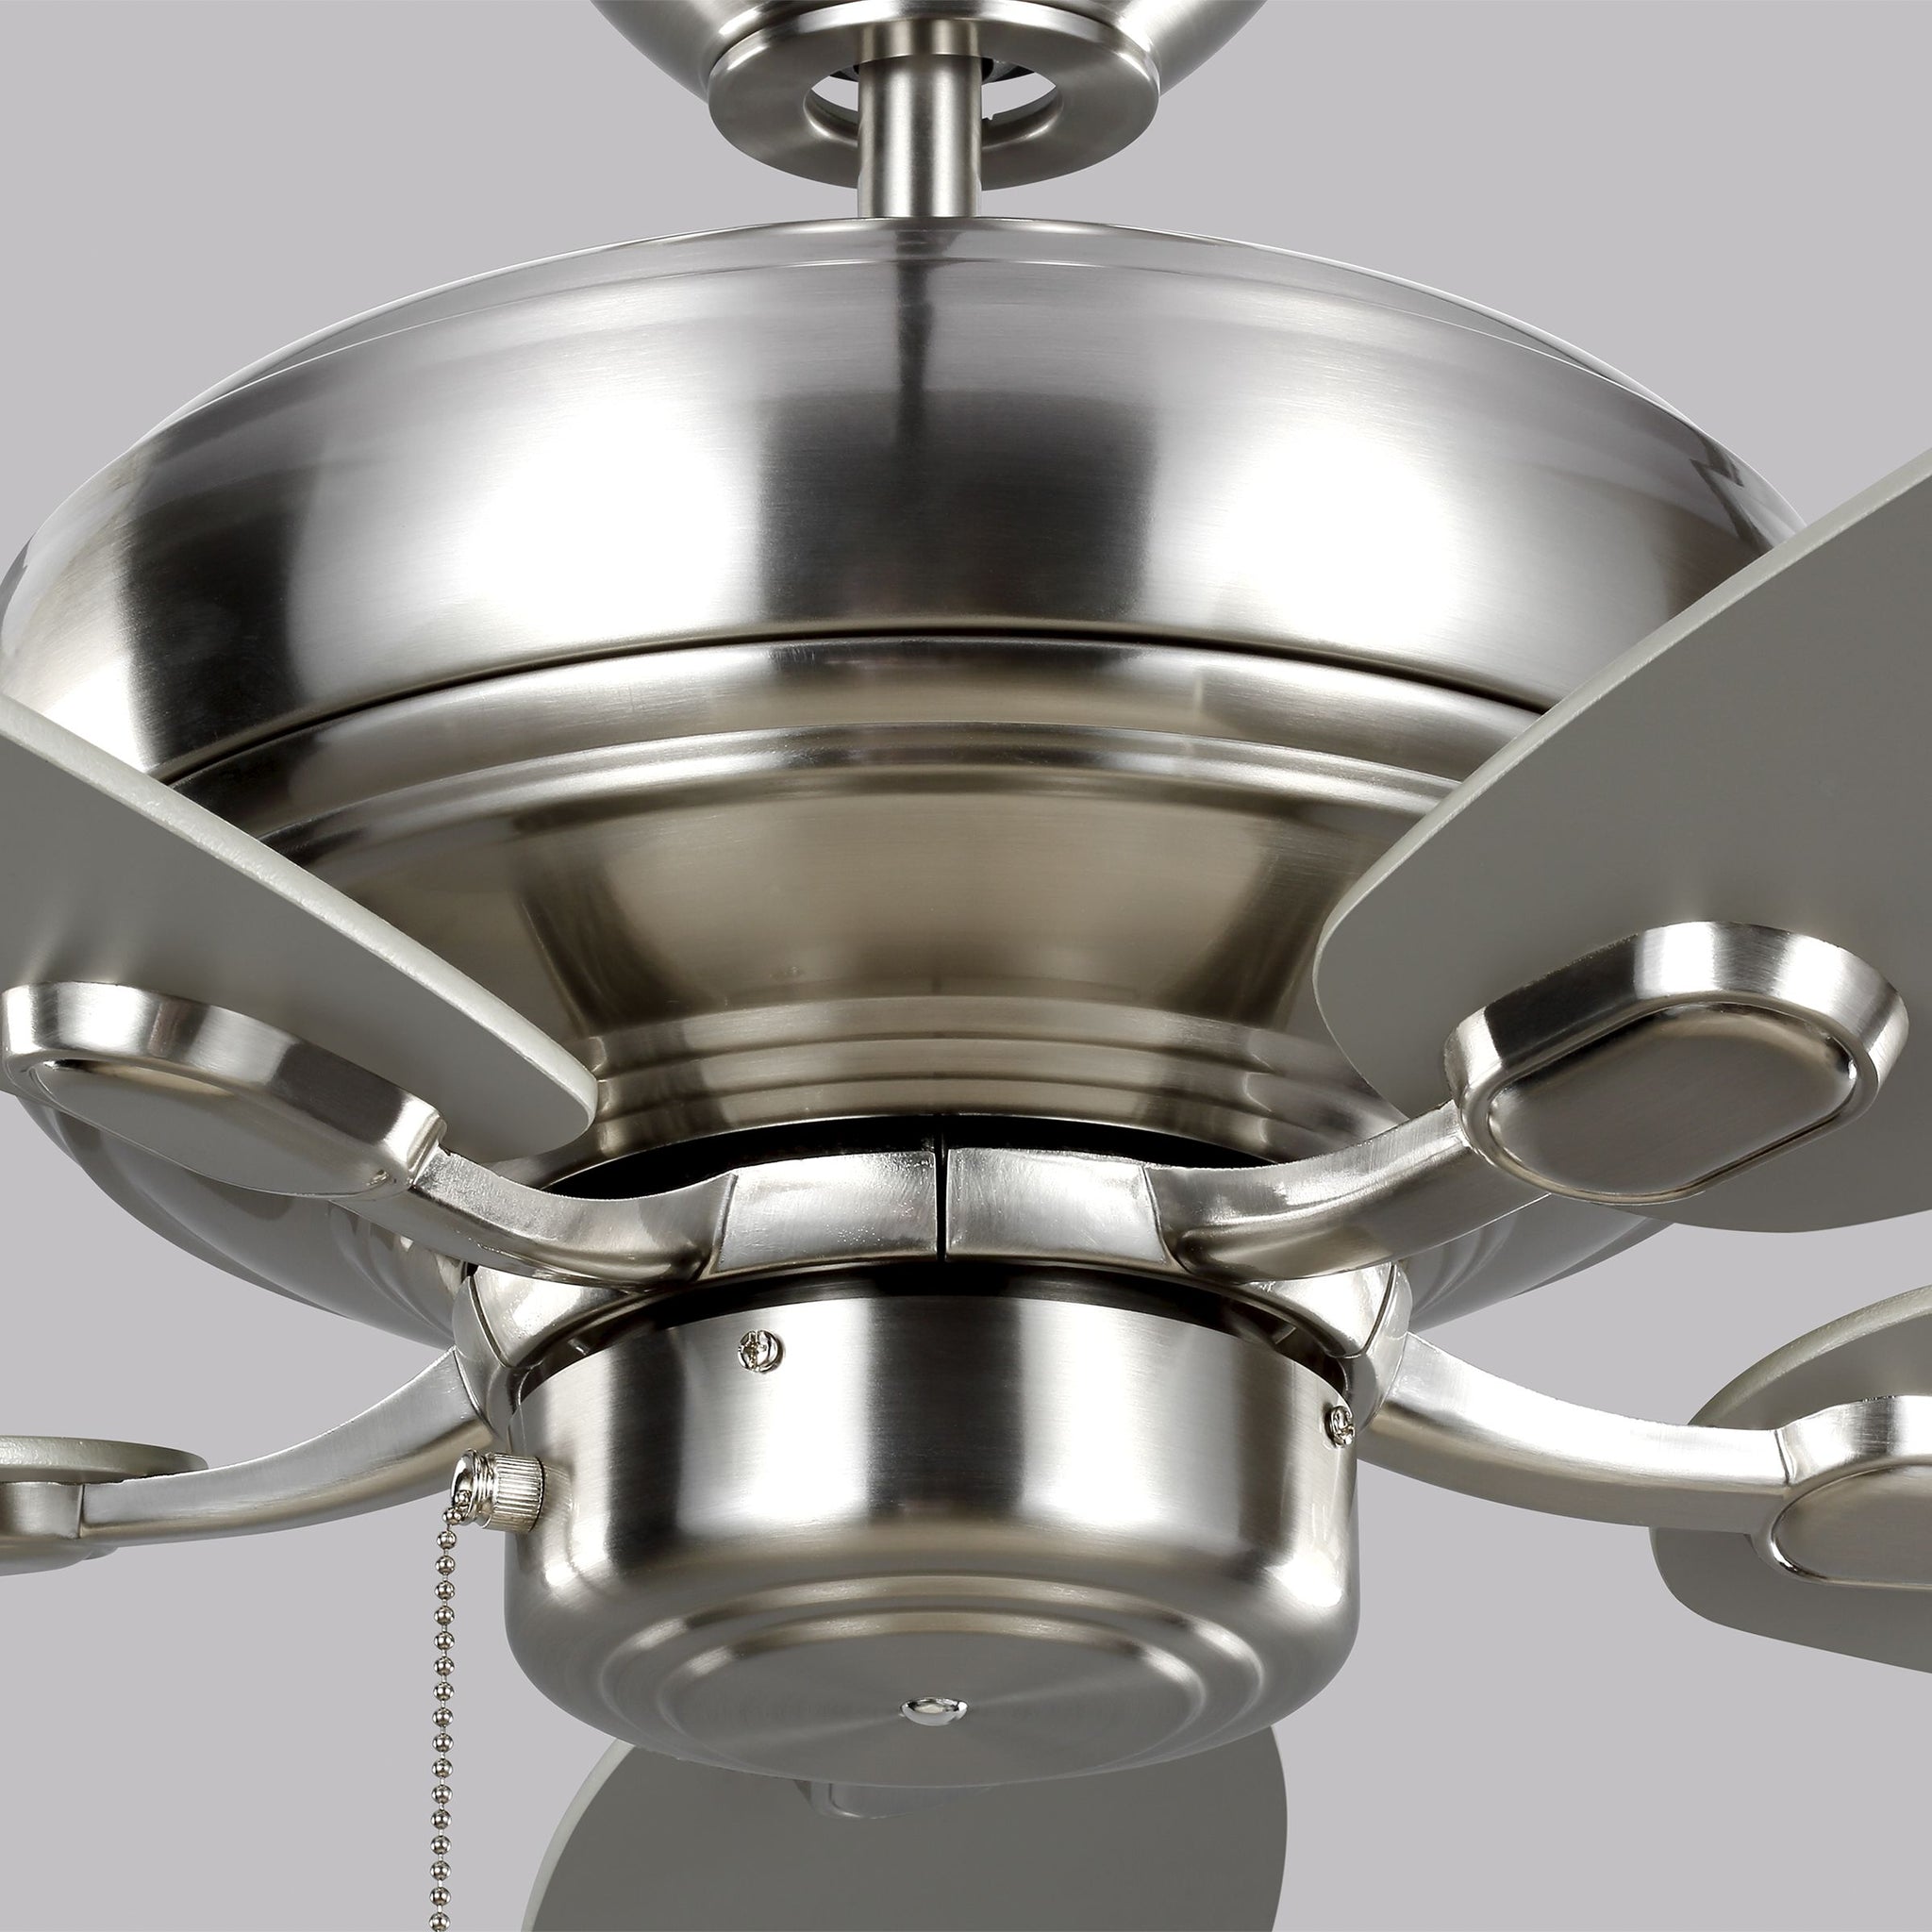 Centro Max Ceiling Fan Brushed Steel